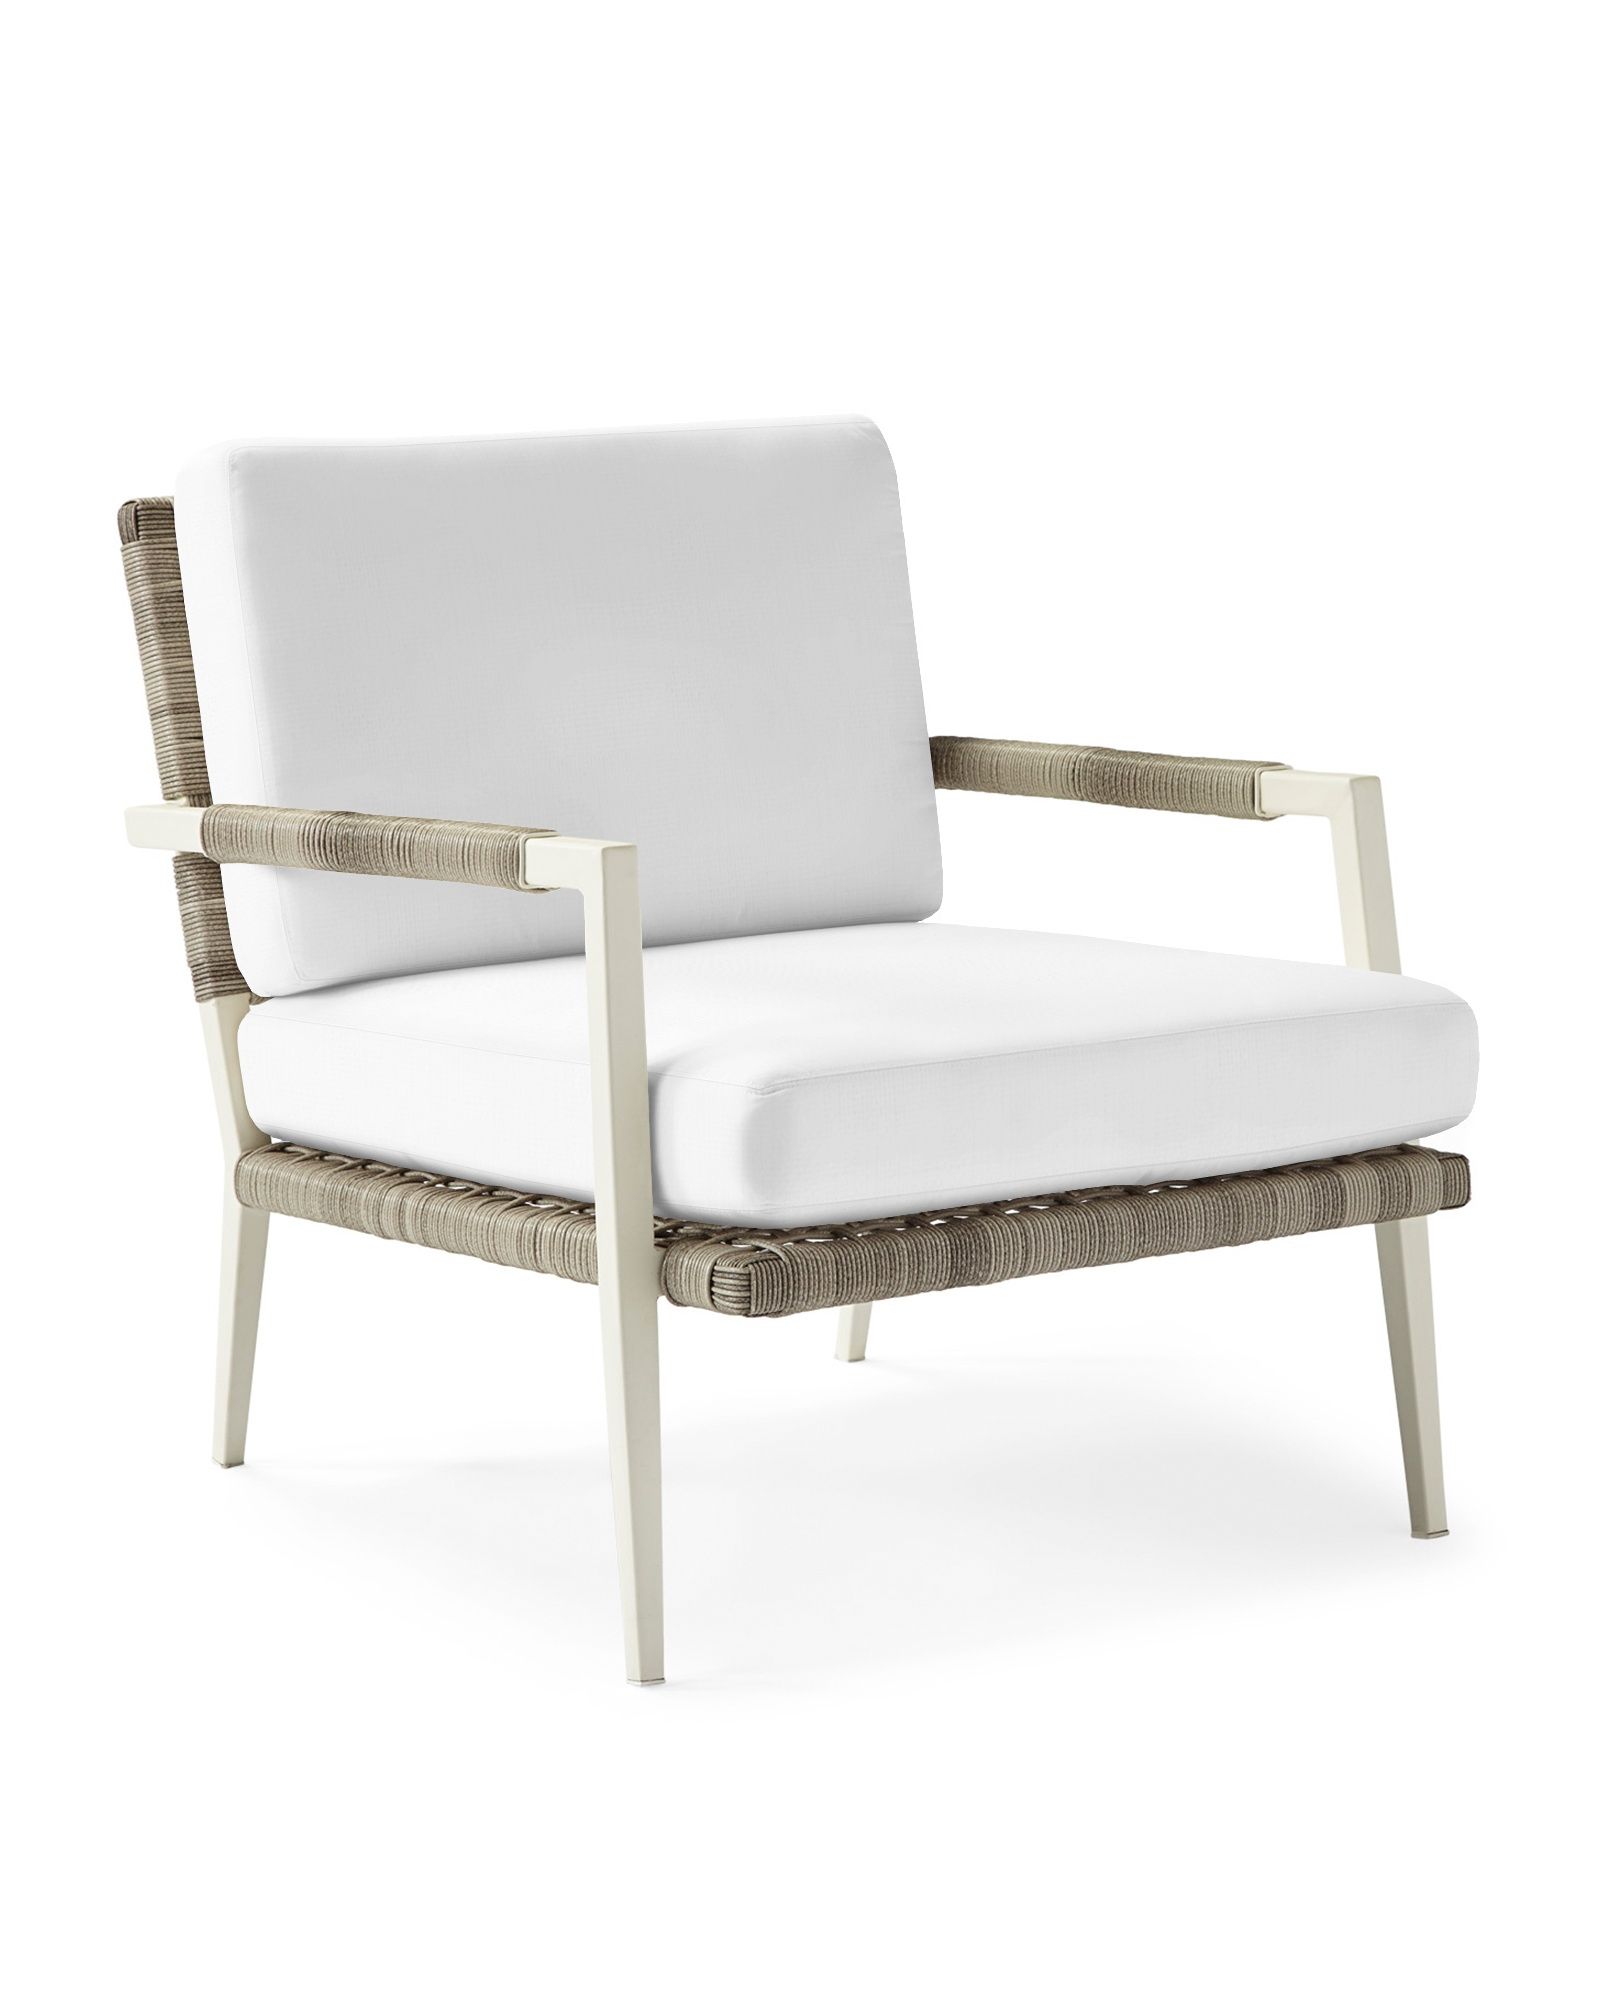 Waterfront Lounge Chair | Serena and Lily